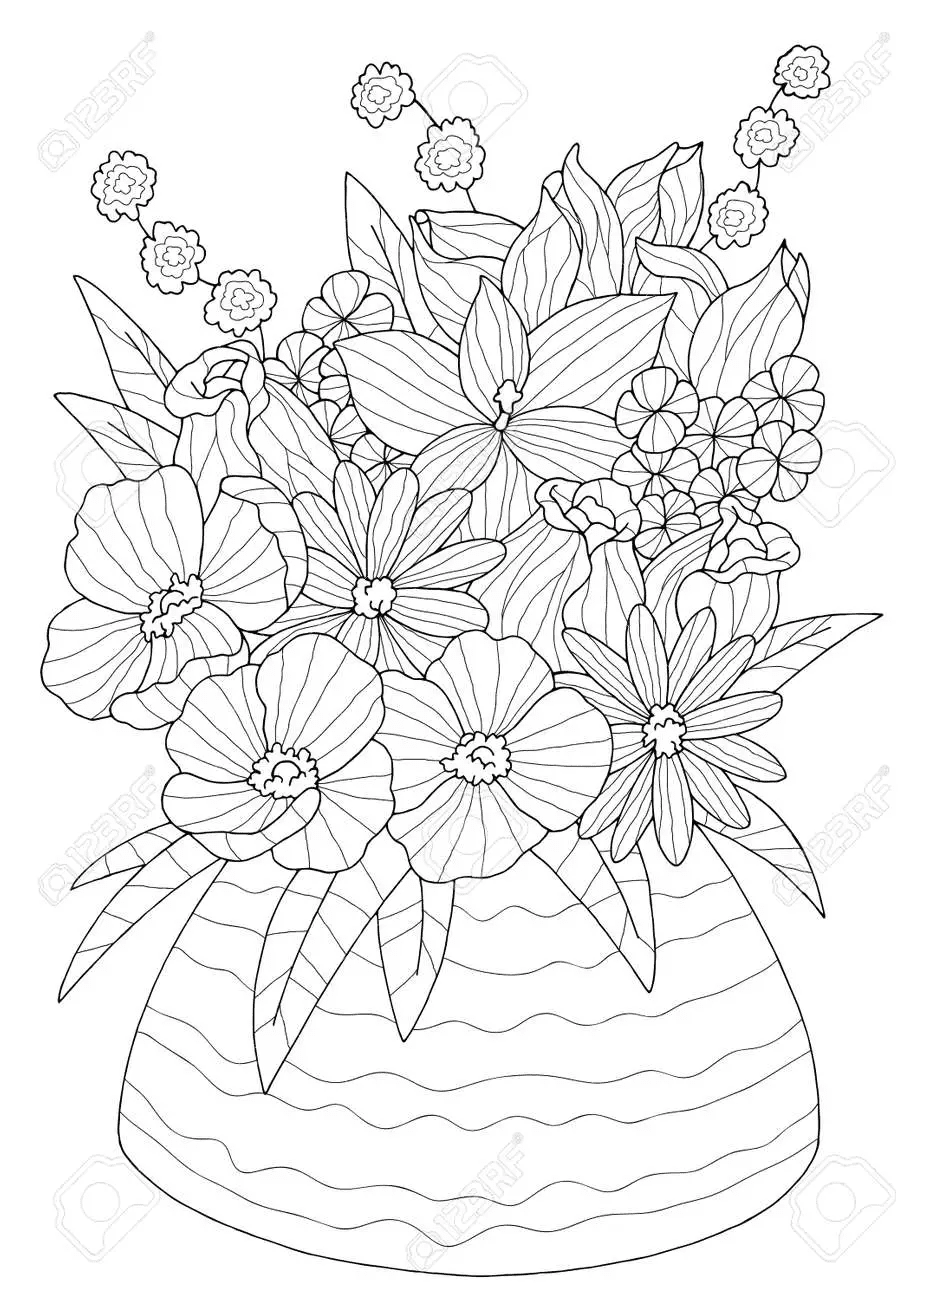 Vase coloring Dahlia flower Coloring Page